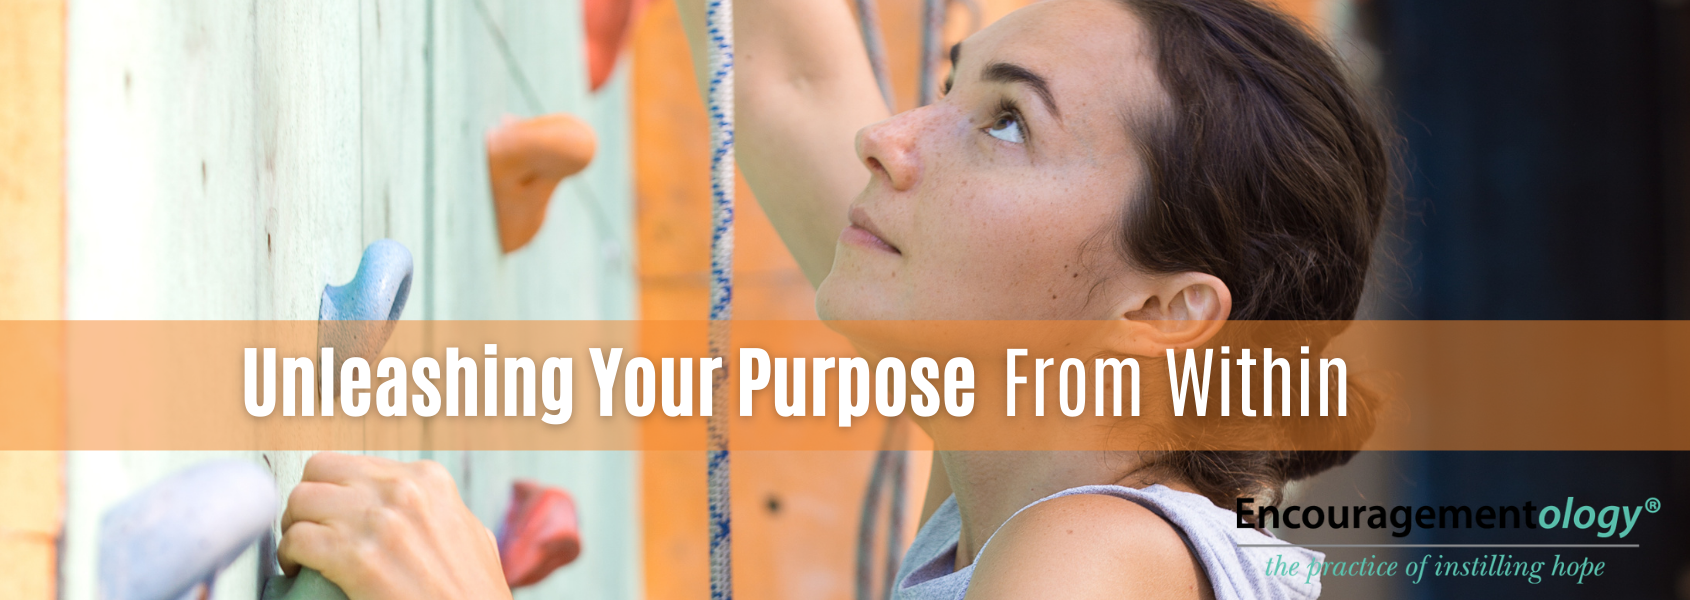 Unleashing Your Purpose From Within